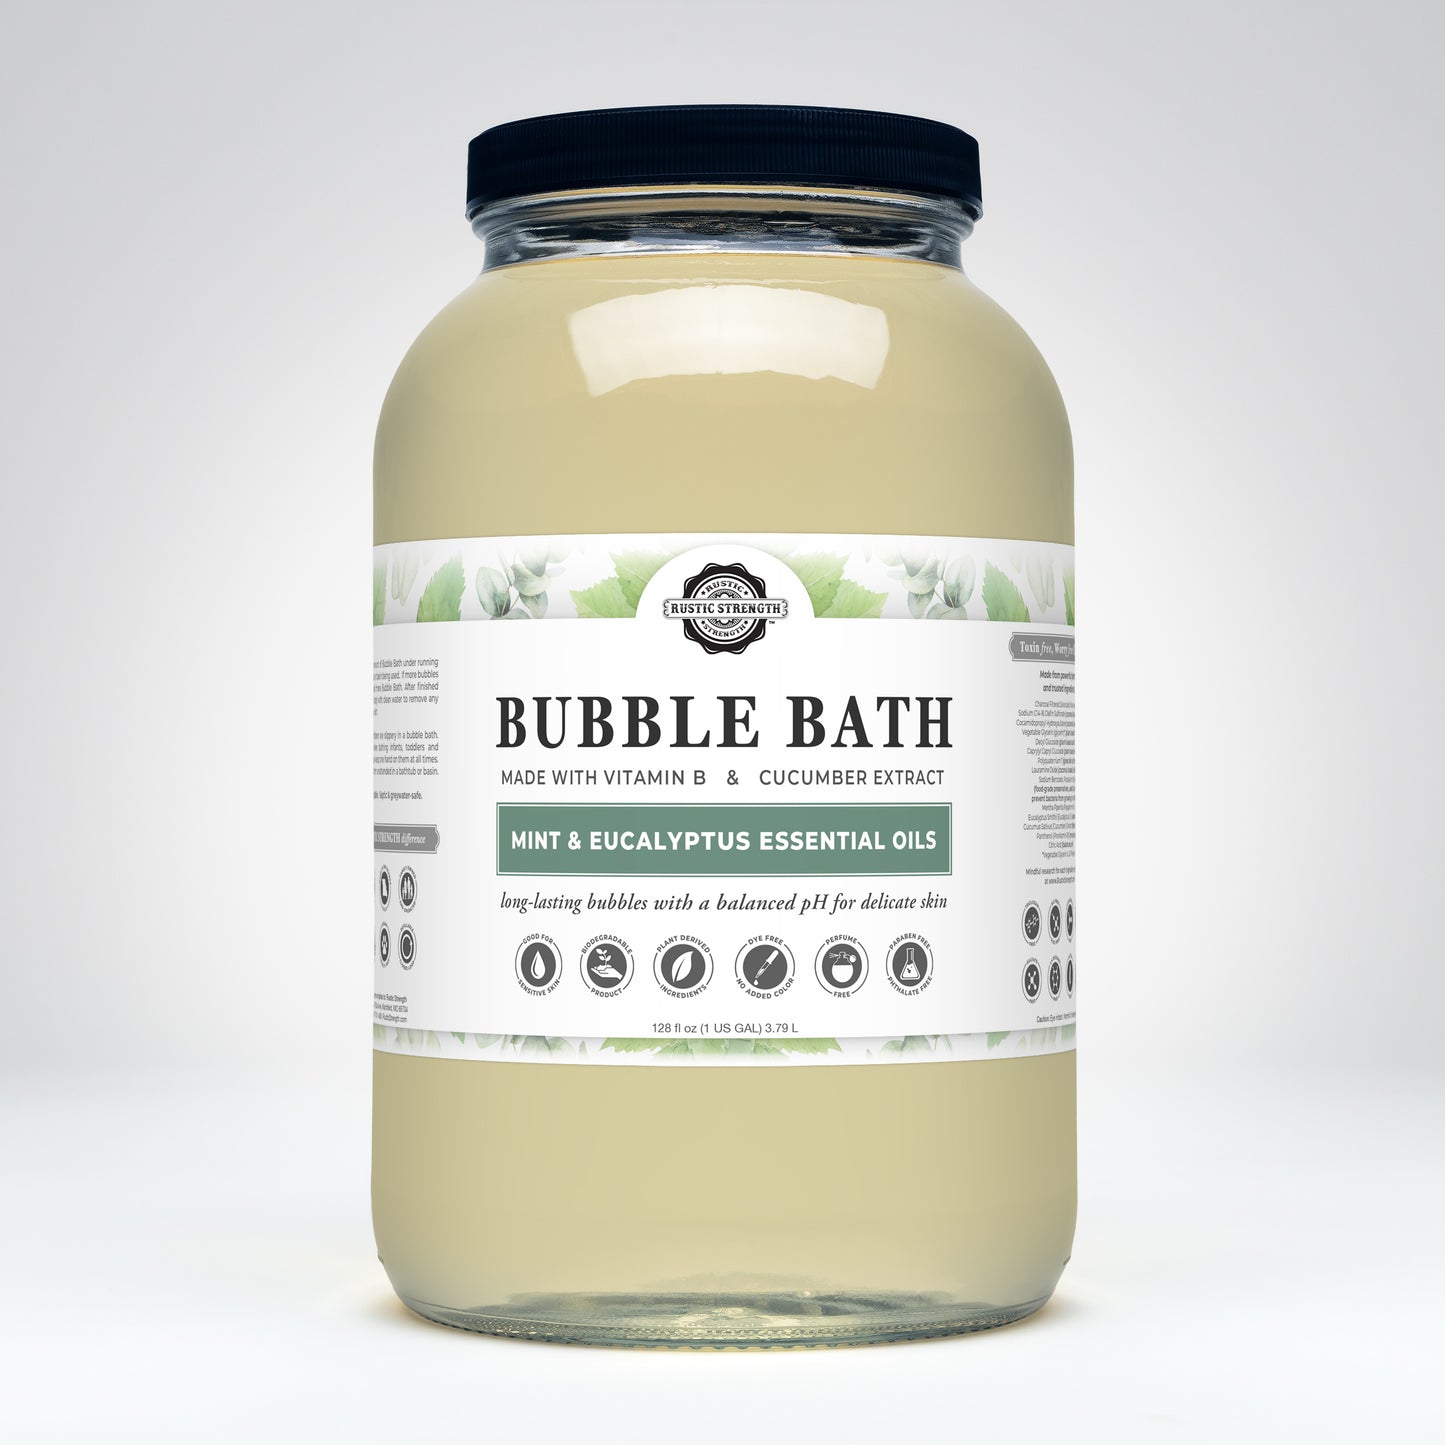 Bubble Bath | Popular Scents or Unscented